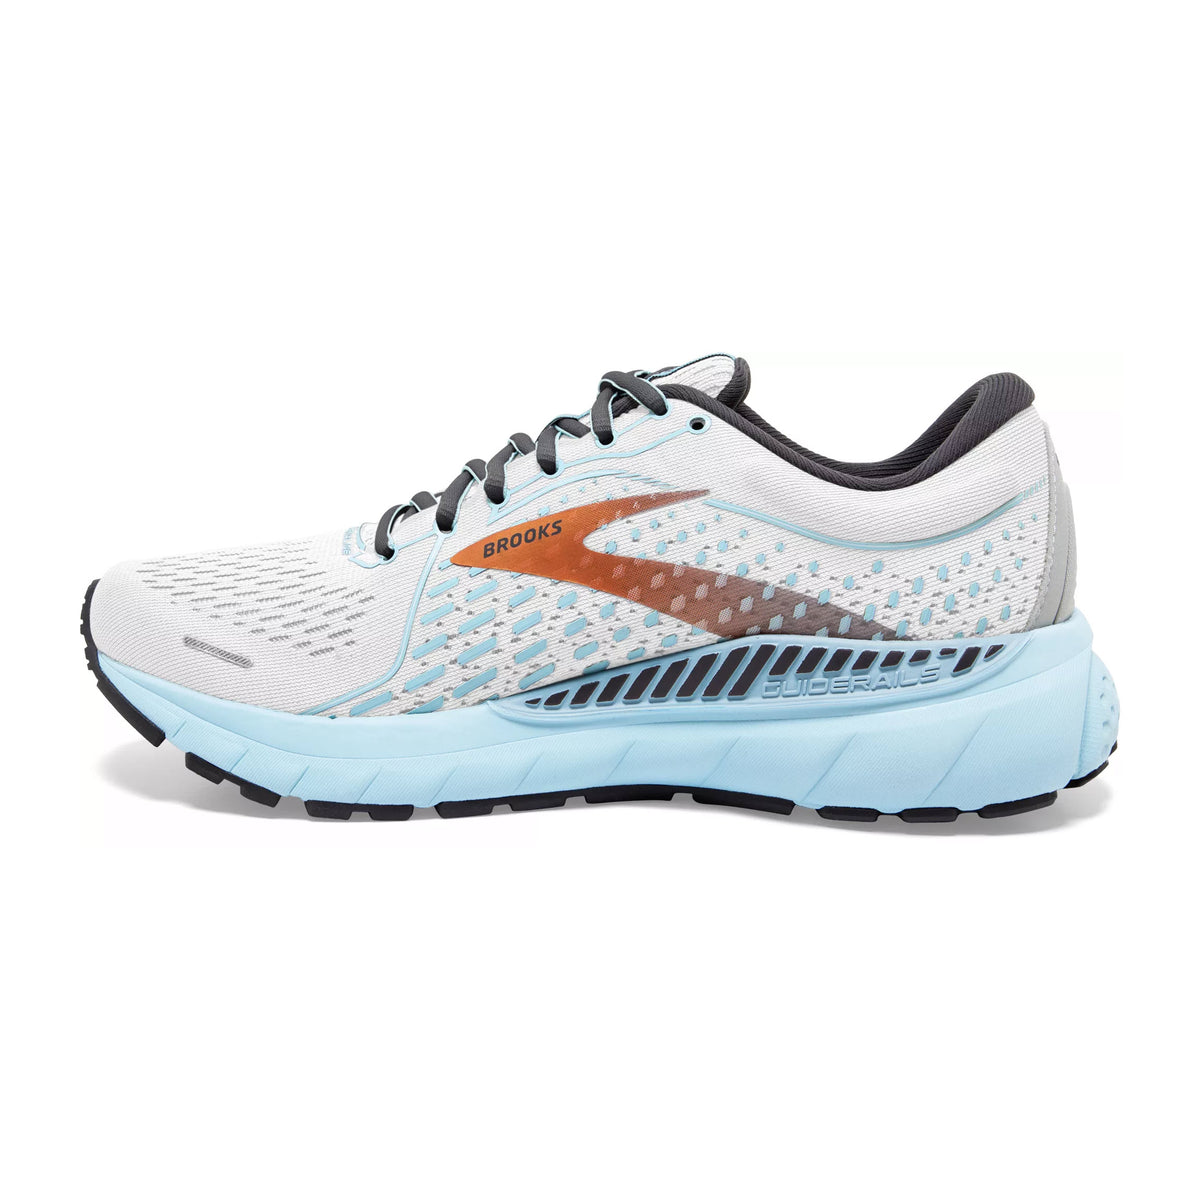 A single white and blue Brooks Adrenaline GTS 21 running shoe with cushioned sole. 
(Product Name: Brooks Adrenaline GTS 21, Brand Name: Brooks)